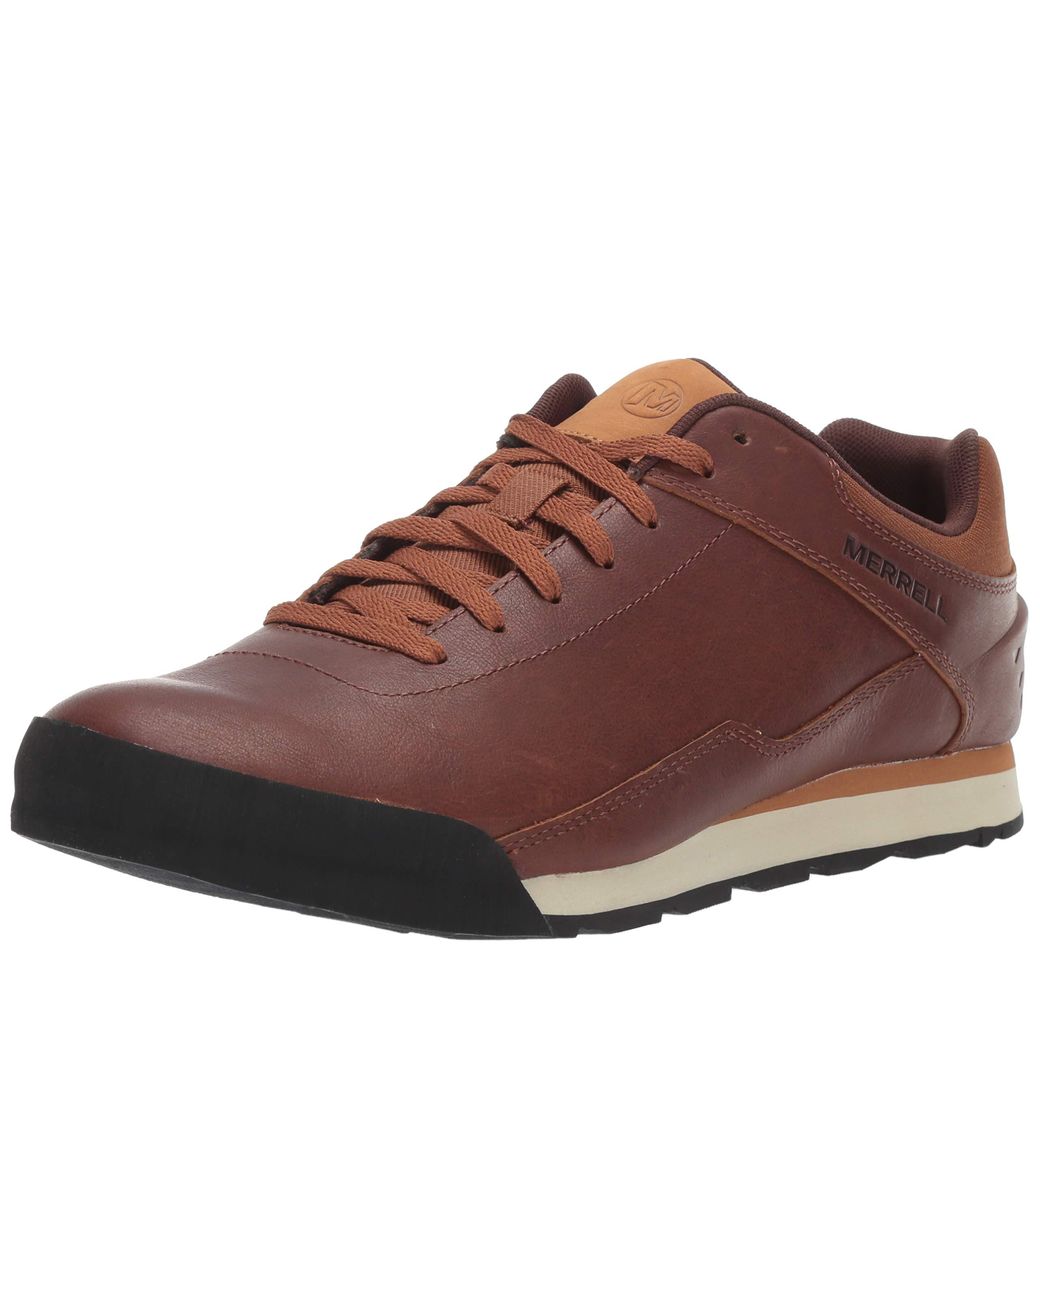 Merrell Burnt Rocked Leather in Tan (Brown) for Men - Save 29% - Lyst